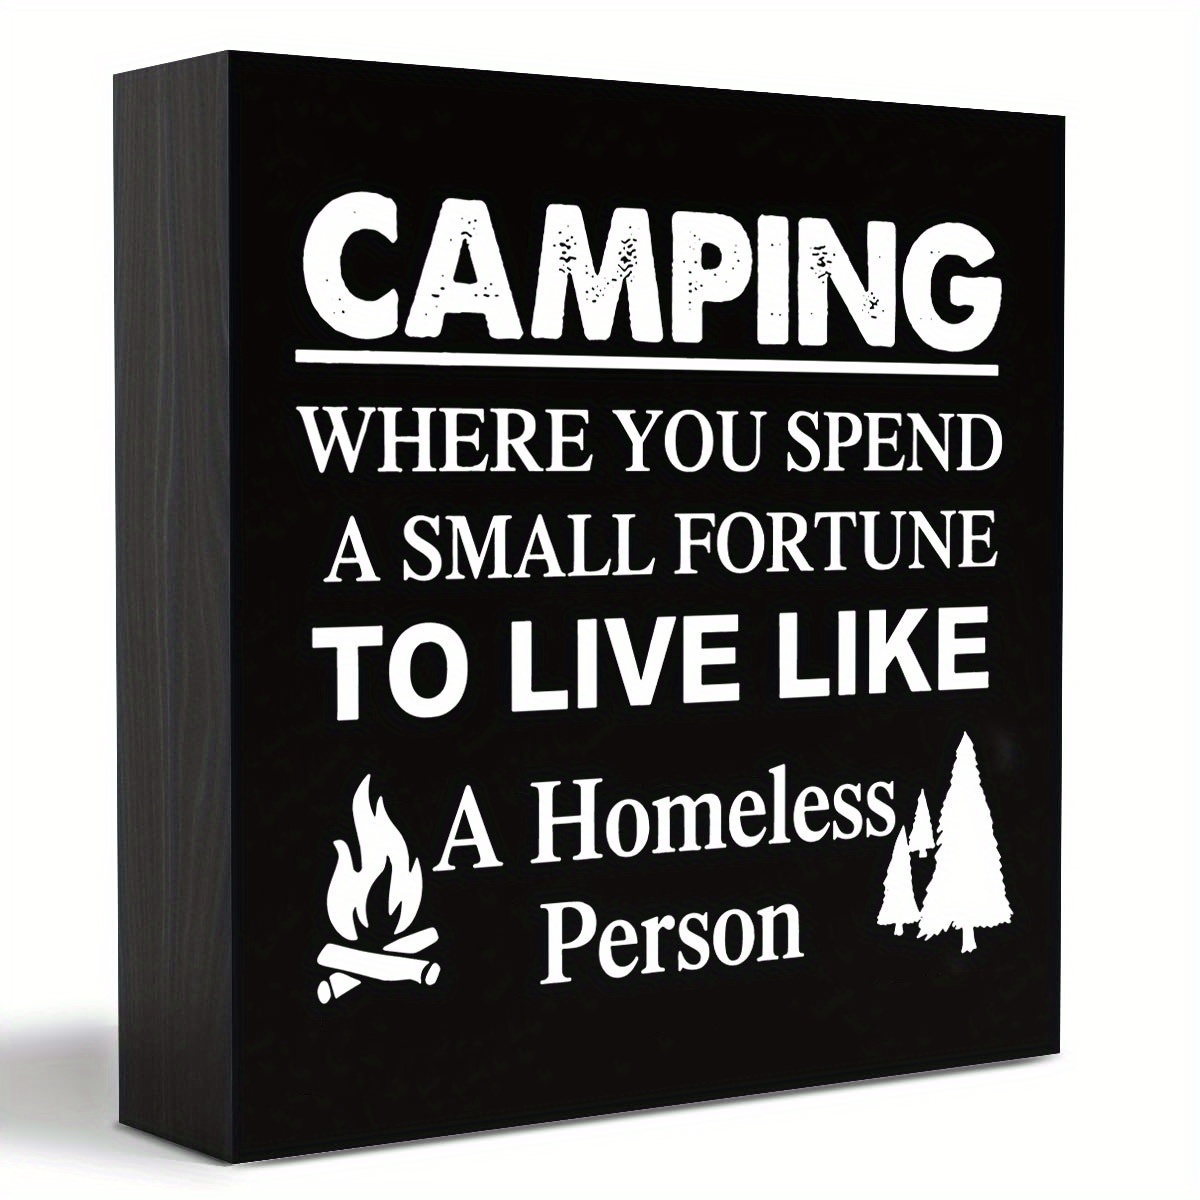 

1pc Camping Where You Spend A Small Fortune Camping Wooden Box Sign Desk Decor 5 X 5 Inch Travel Trailer Camper Box Sign Wood Block Sign Rustic Decor